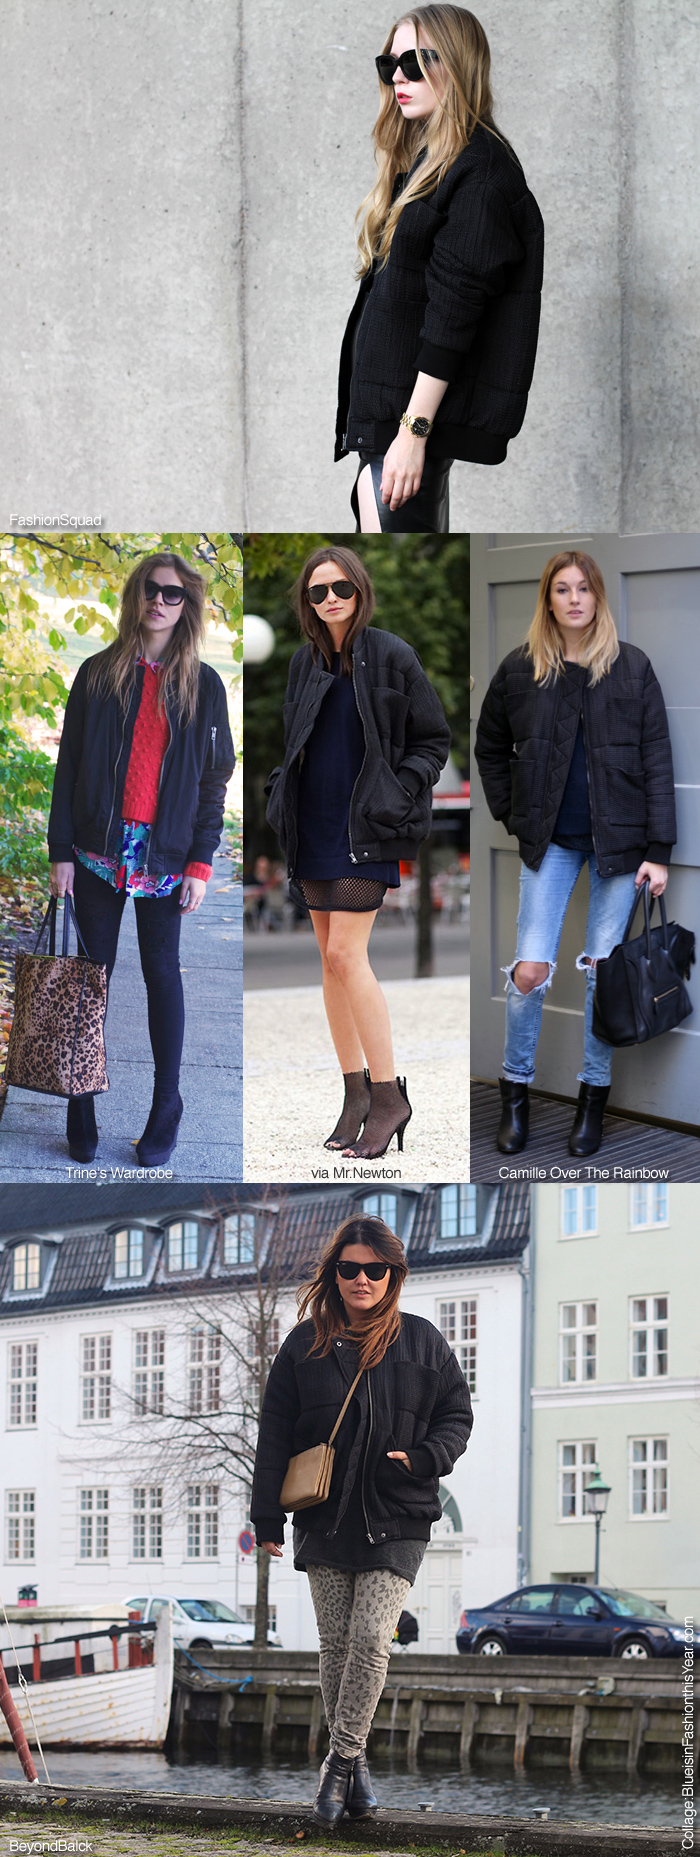 Bloggers Carin Wester "Reva" Jacket - Blue is in Fashion this Year